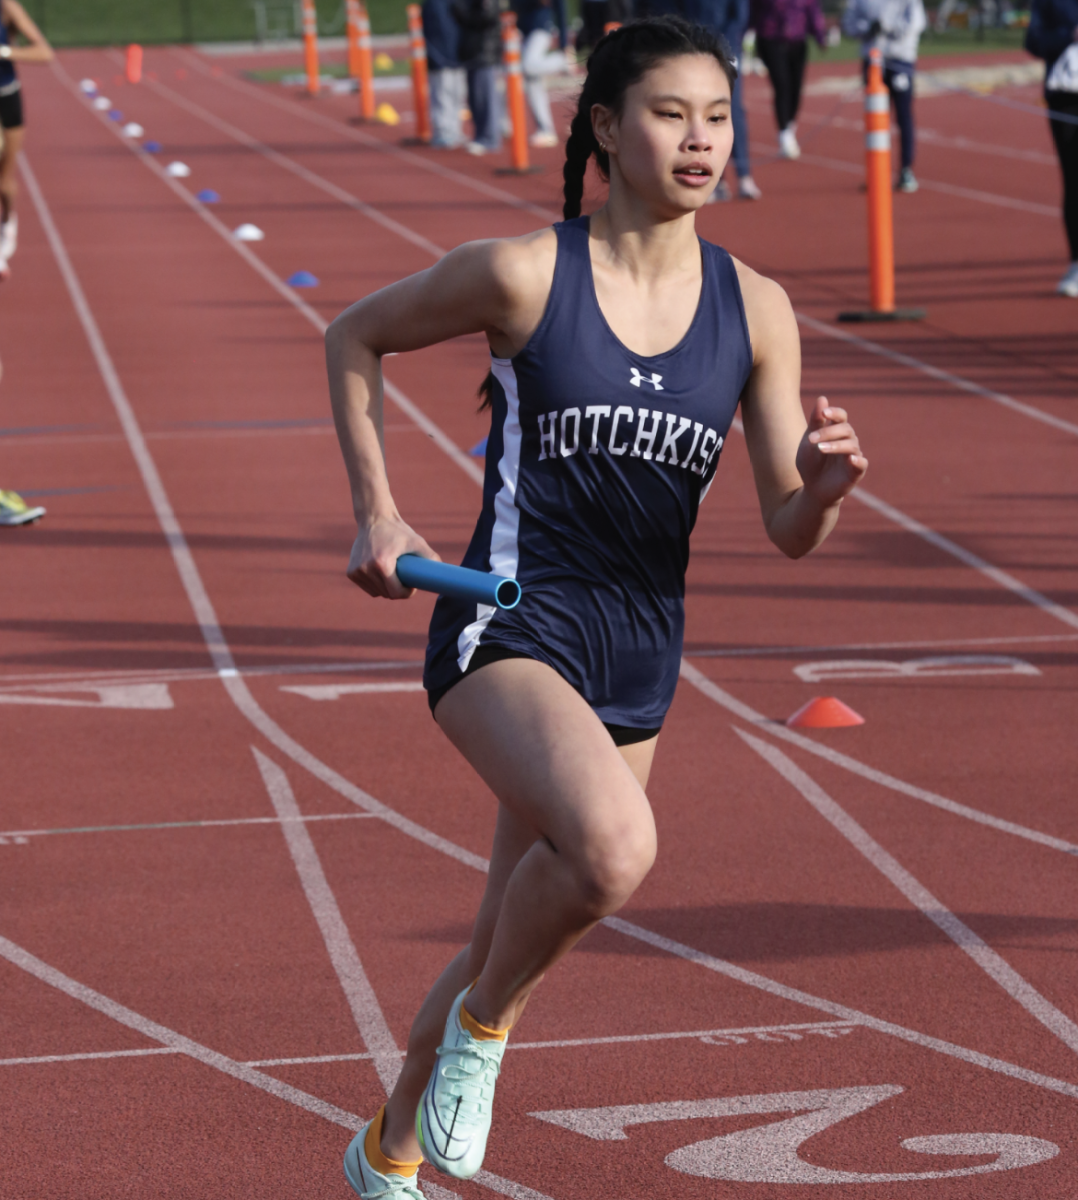 Christa runs in the 4x400 Meter relay.